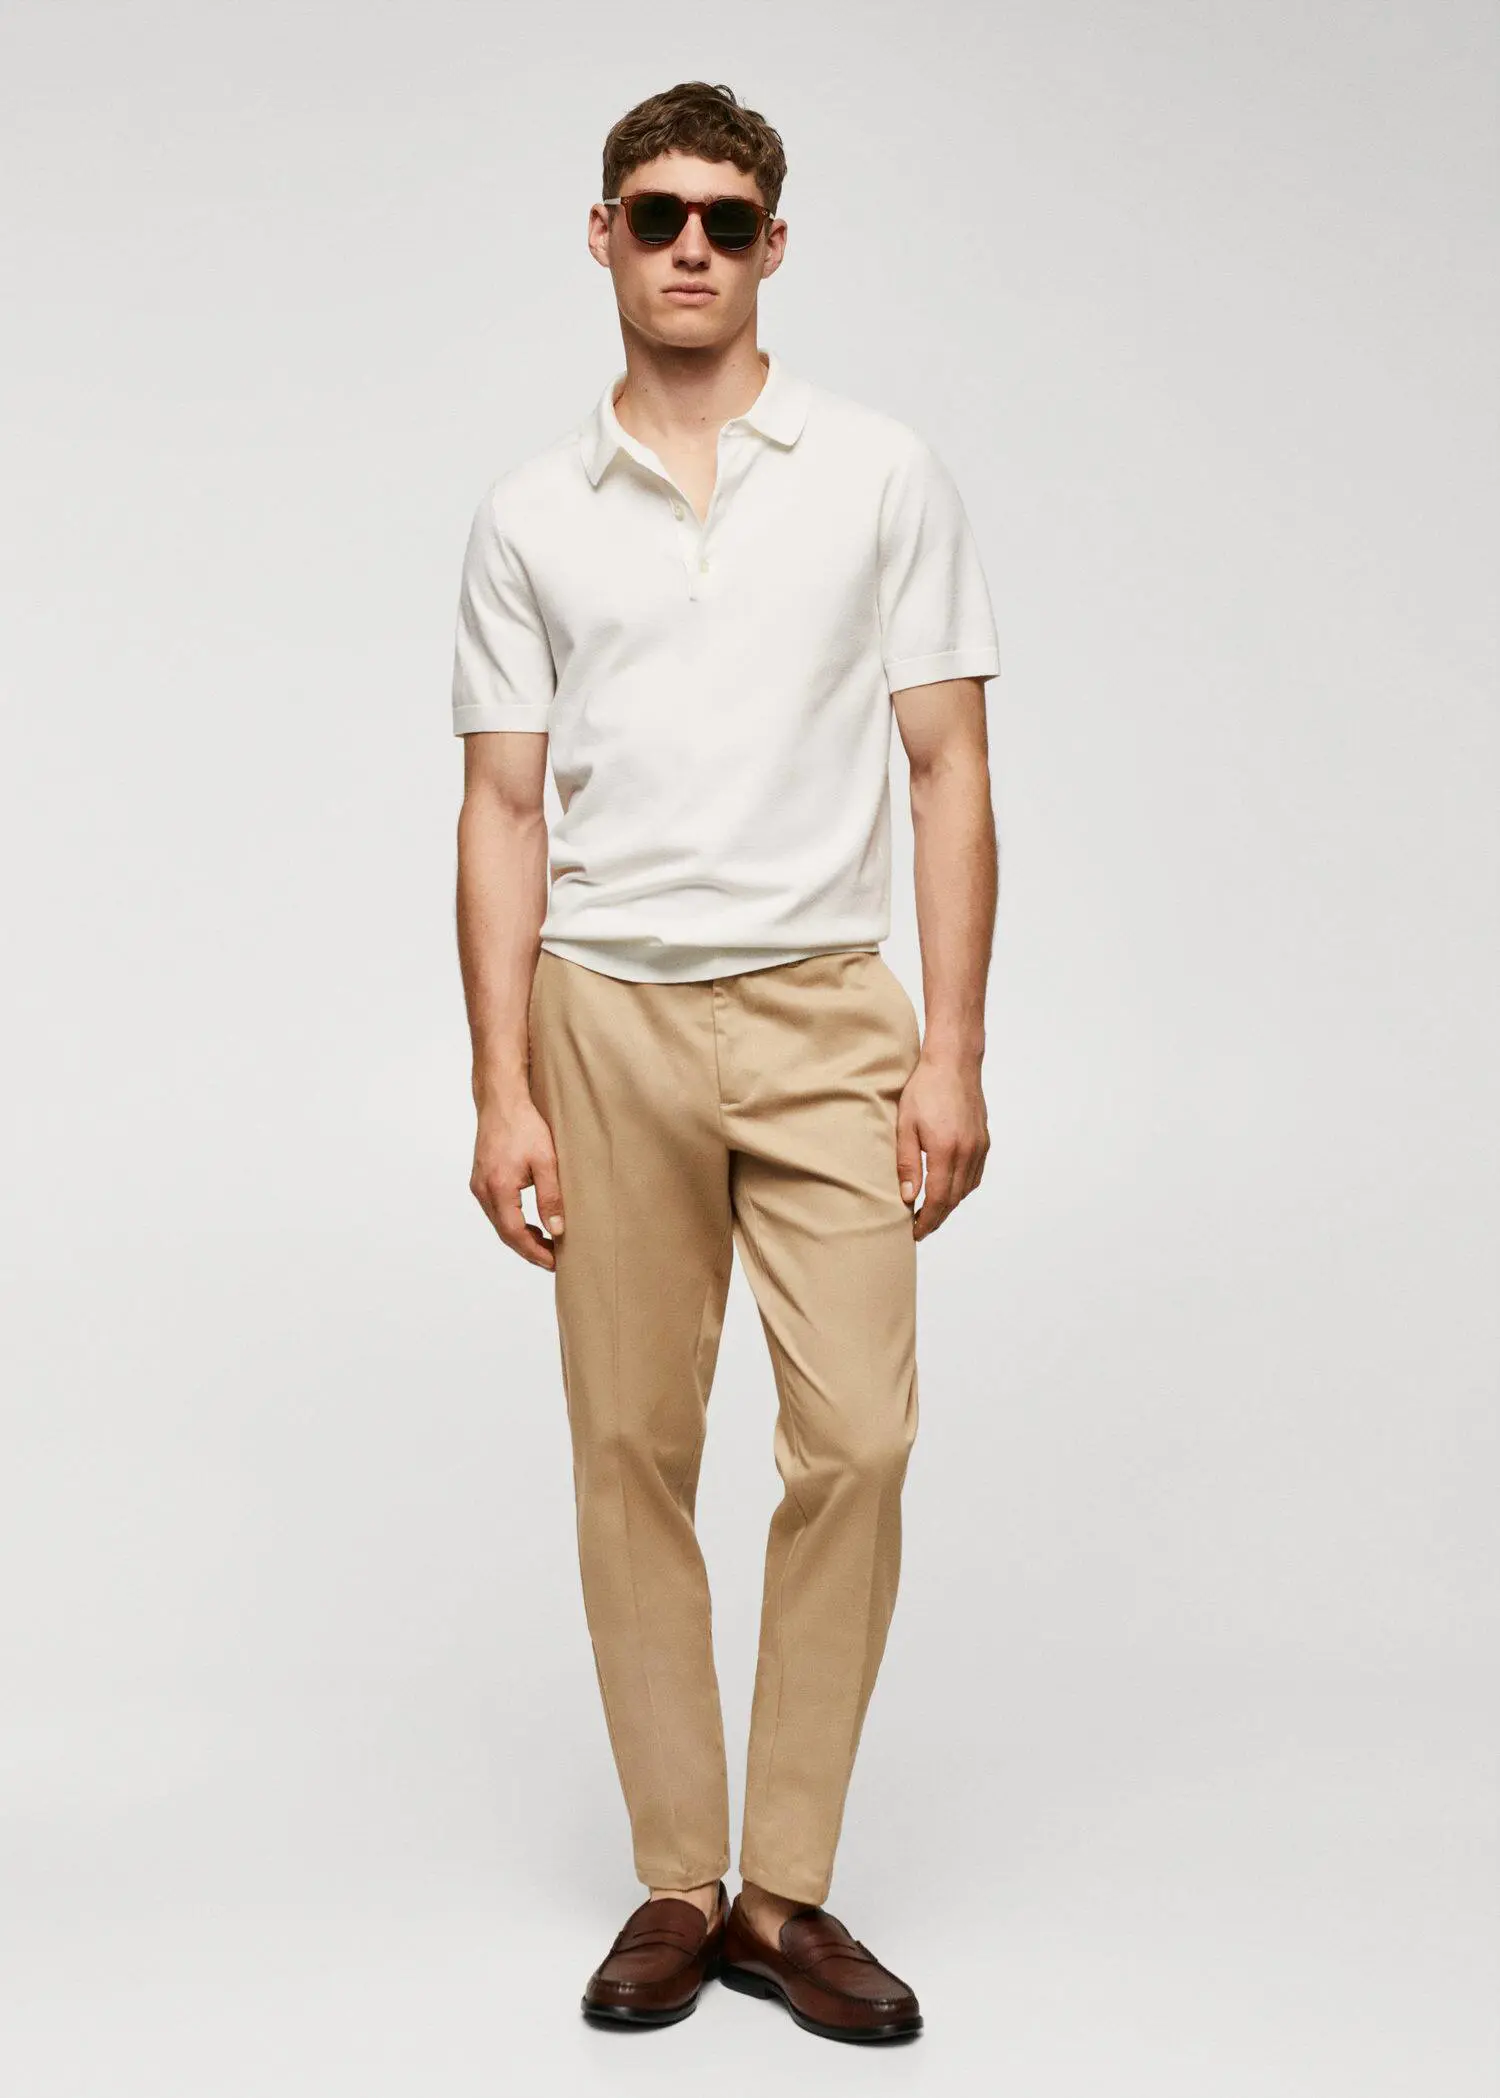 Mango Slim fit chino trousers. a man in a white shirt and tan pants. 